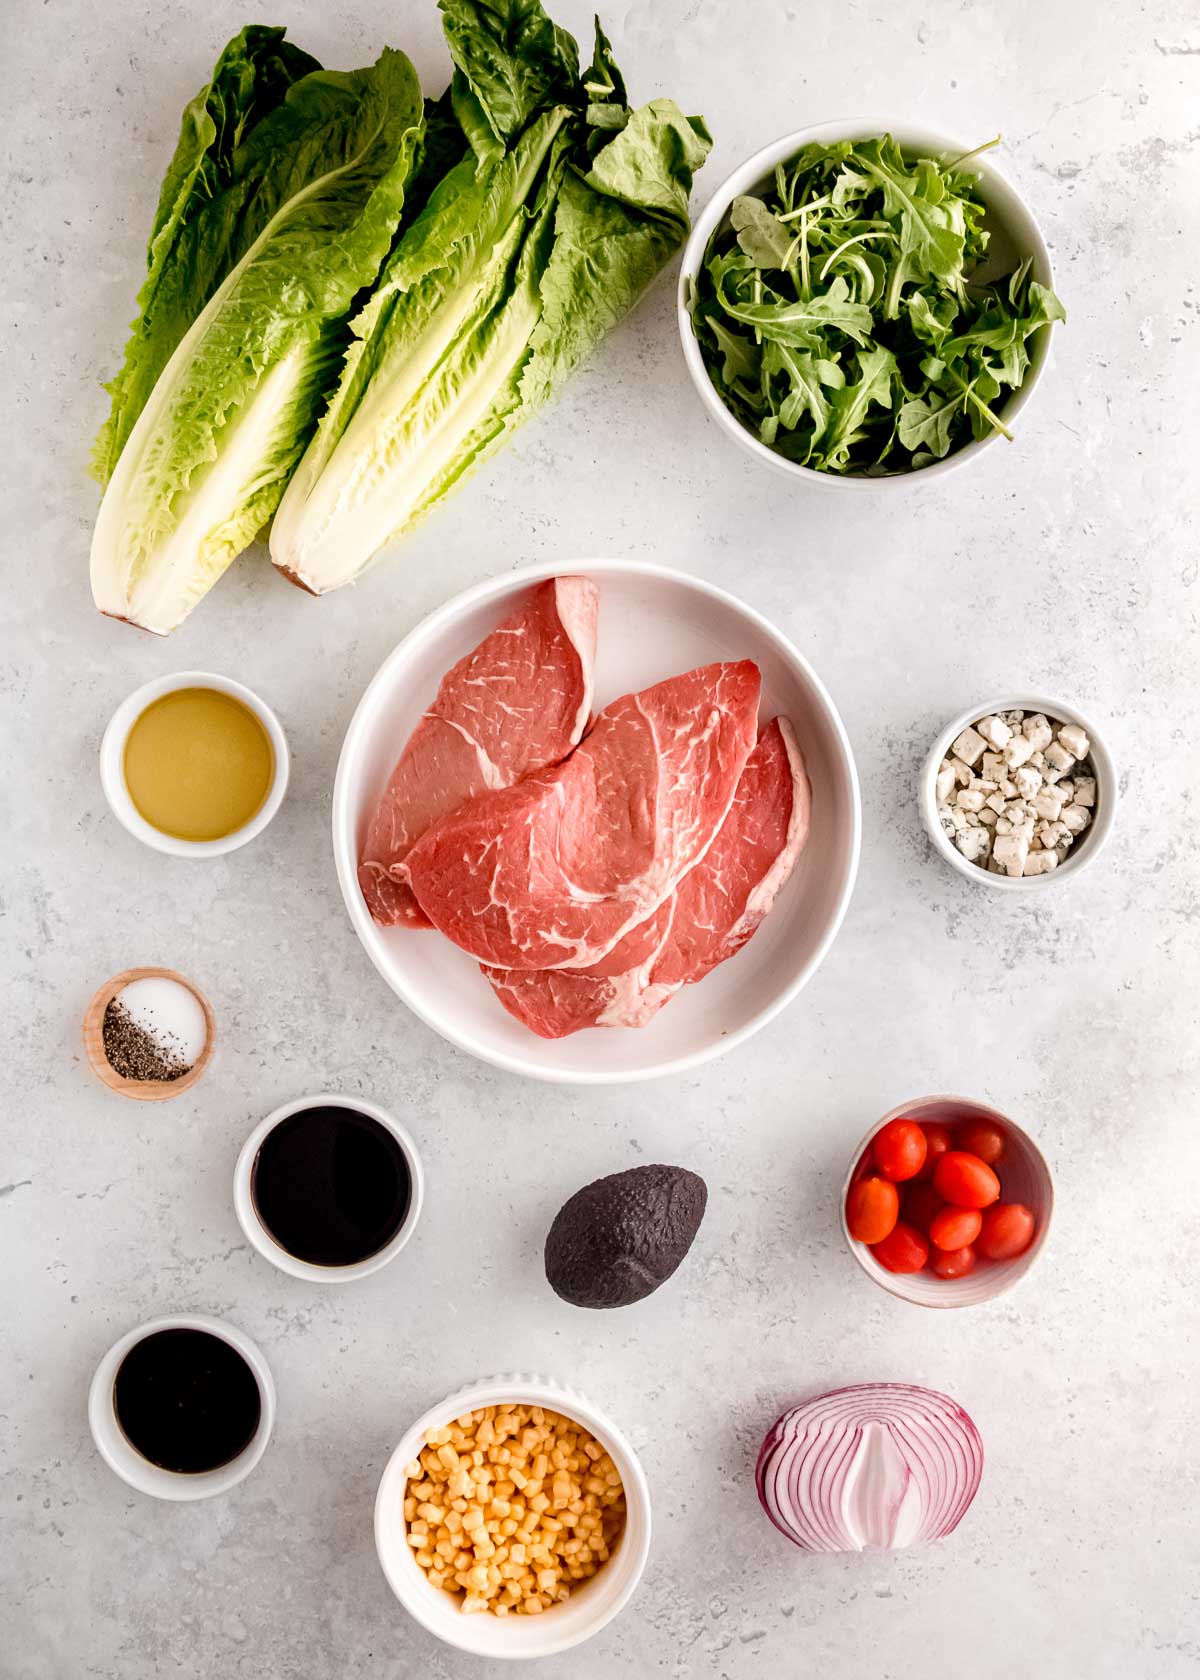 ingredients for an amazing steak salad